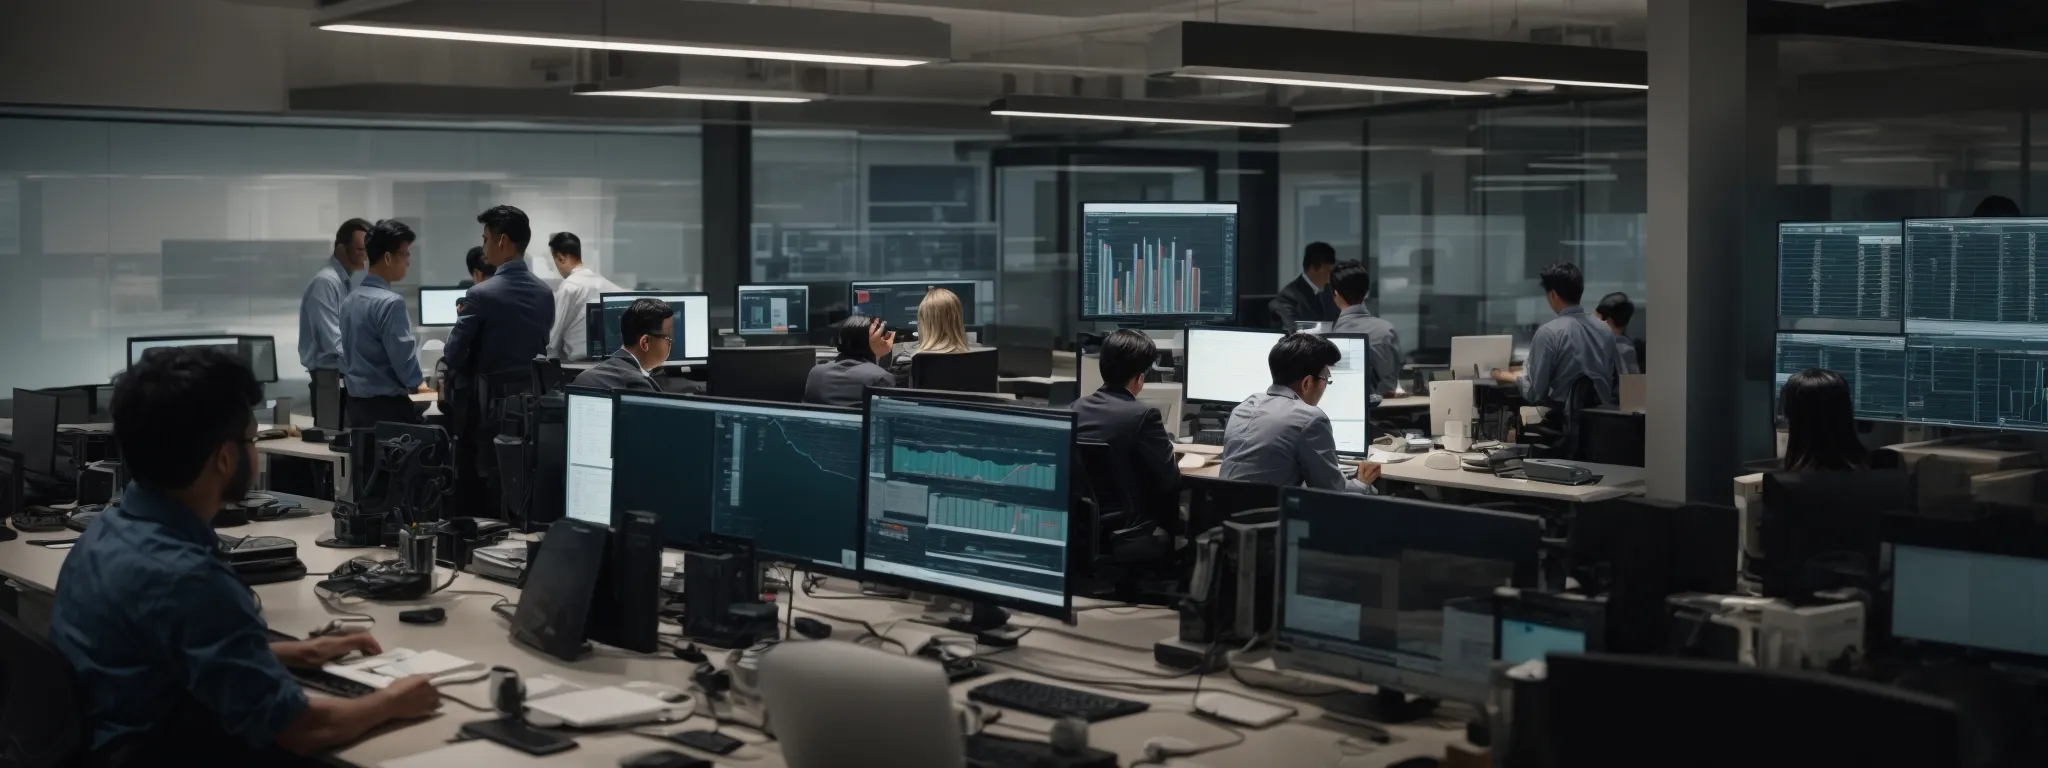 a well-lit office space where a team of professionals intently studies analytics dashboards on large computer screens.